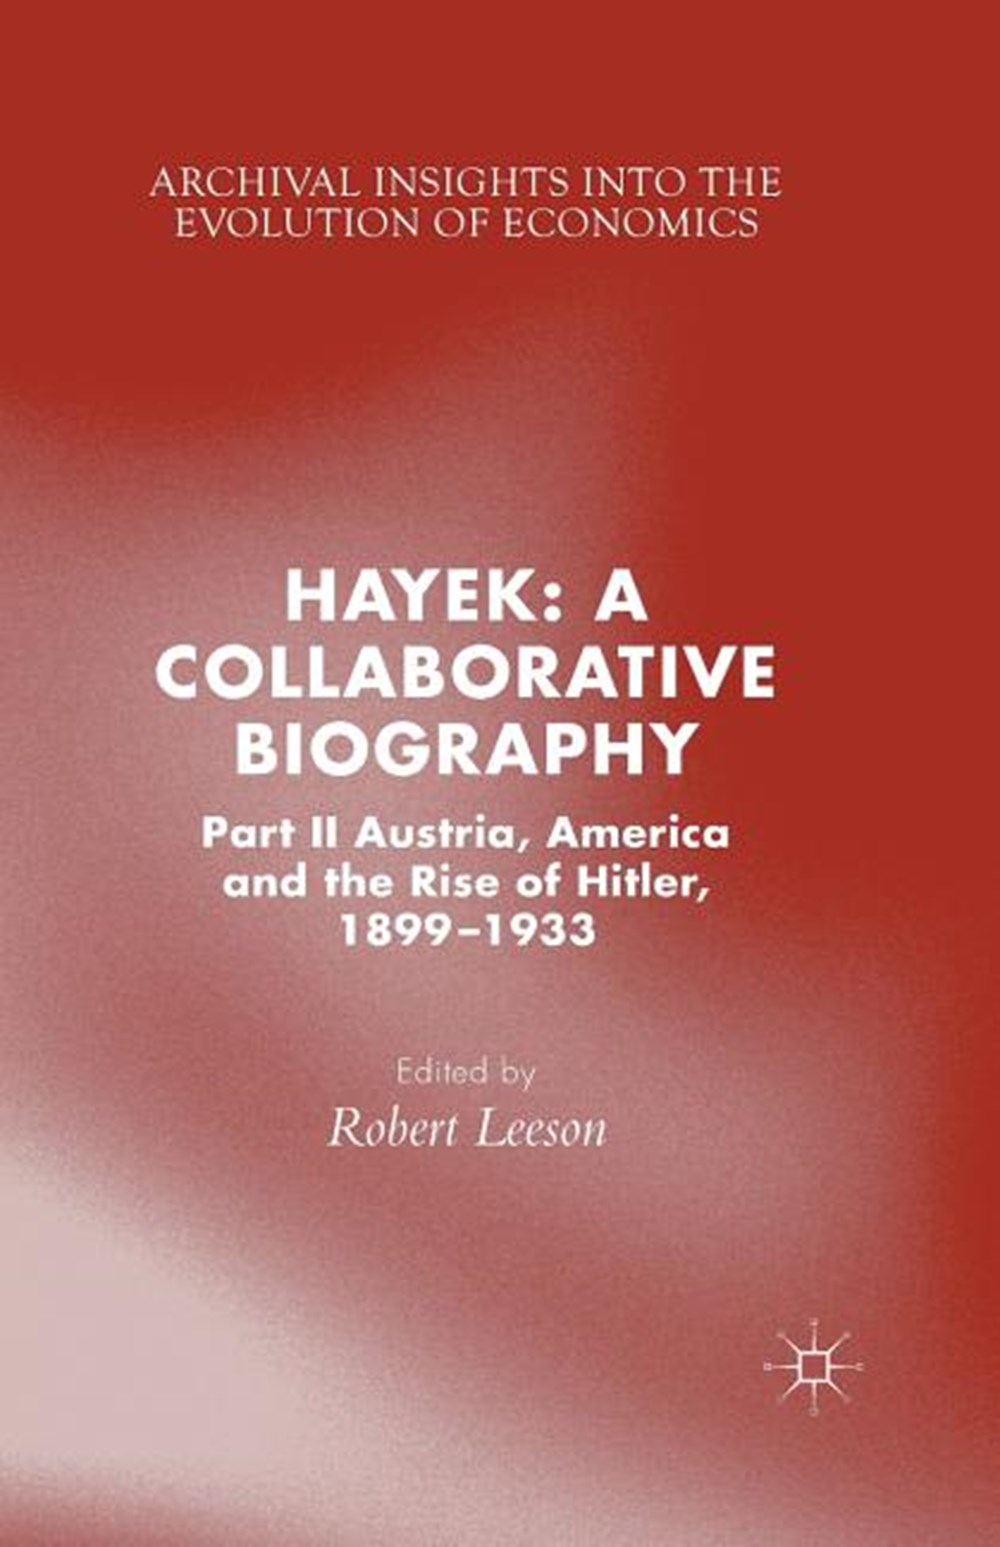 Hayek A Collaborative Biography: Part II, Austria, America and the Rise of Hitler, 1899-1933